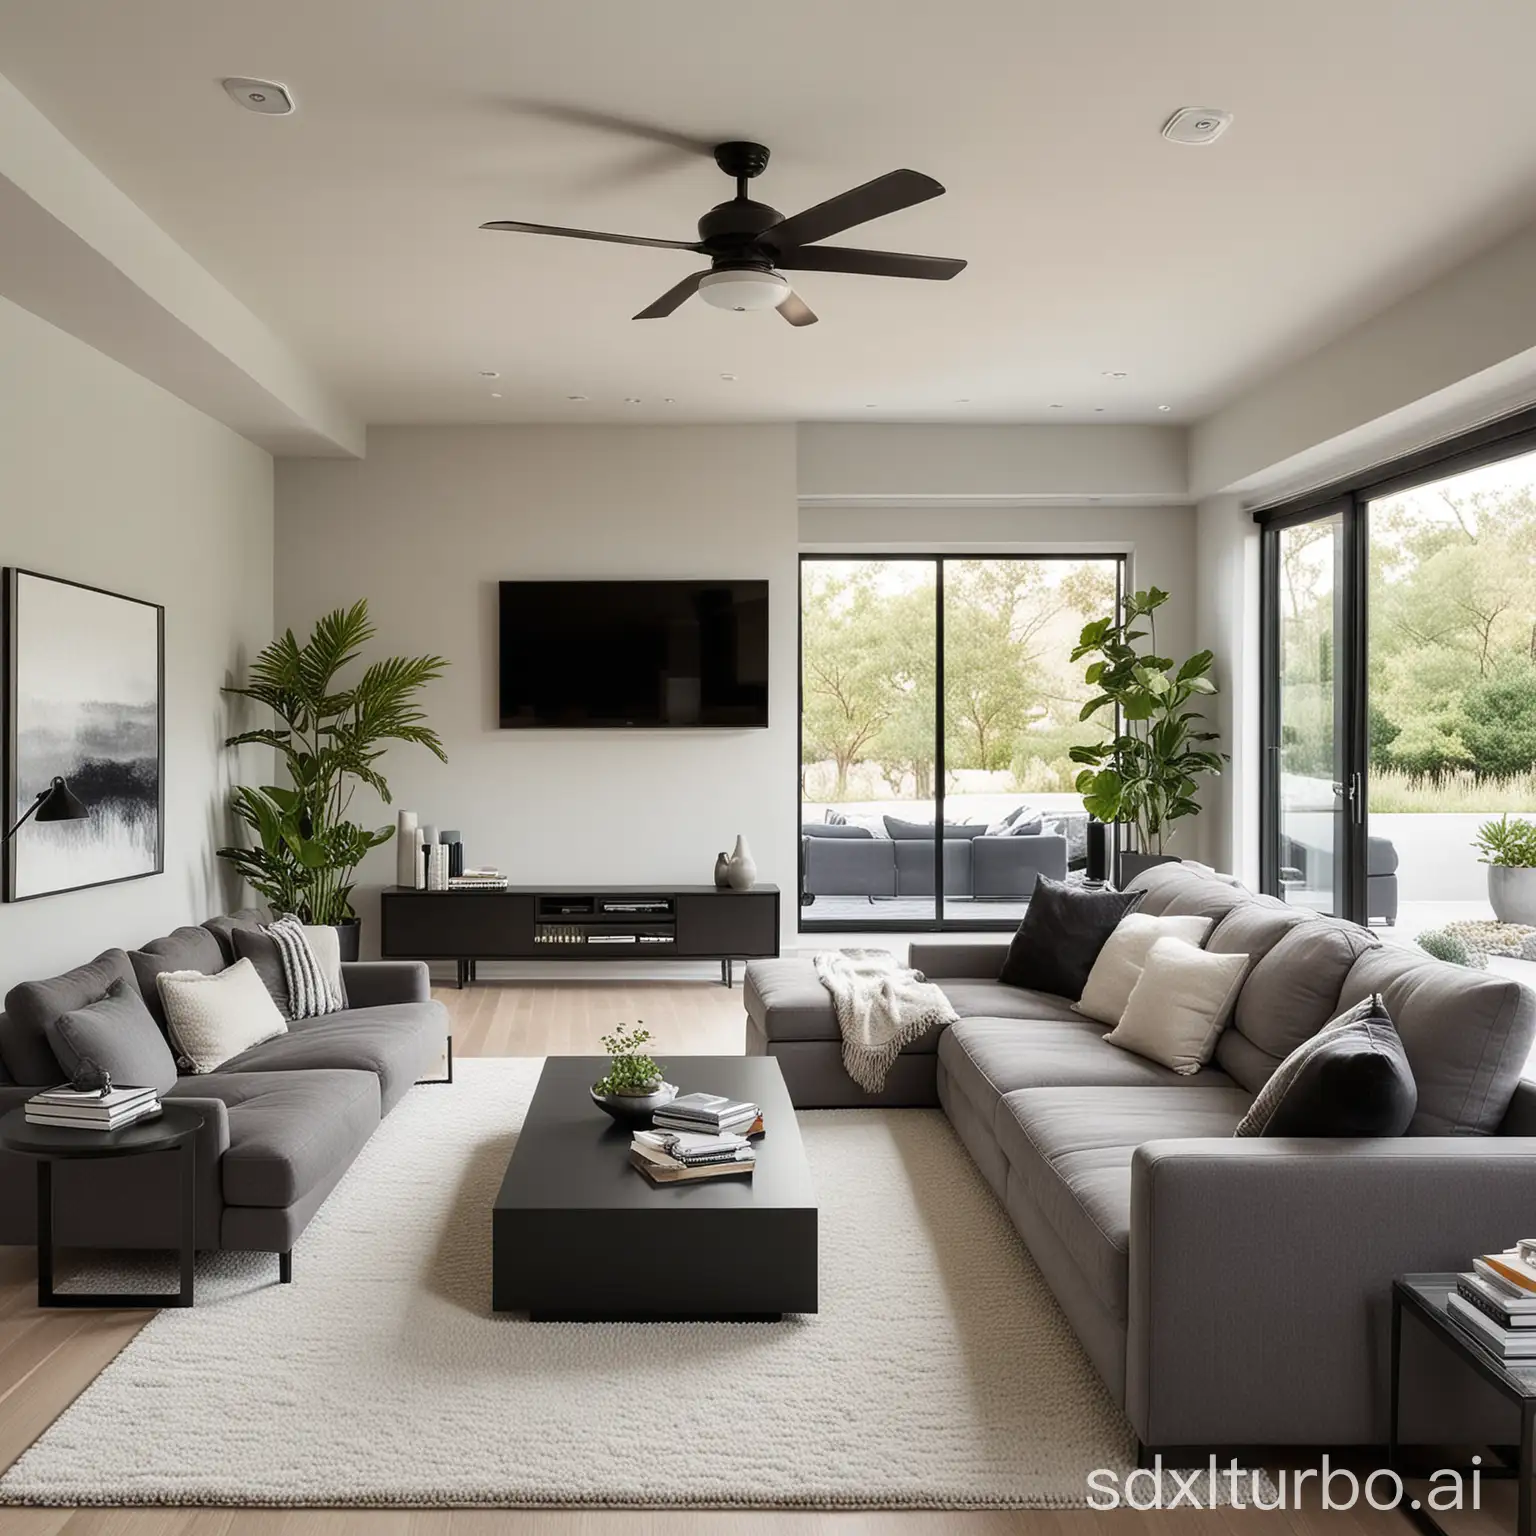 A modern-style living room, featuring a long, gray sofa and a matching, comfortable rocking chair on a soft, white rug, next to them a glass coffee table and a large, black TV stand are placed, while the minimalist-style space is illuminated by the light of the ceiling spotlights.